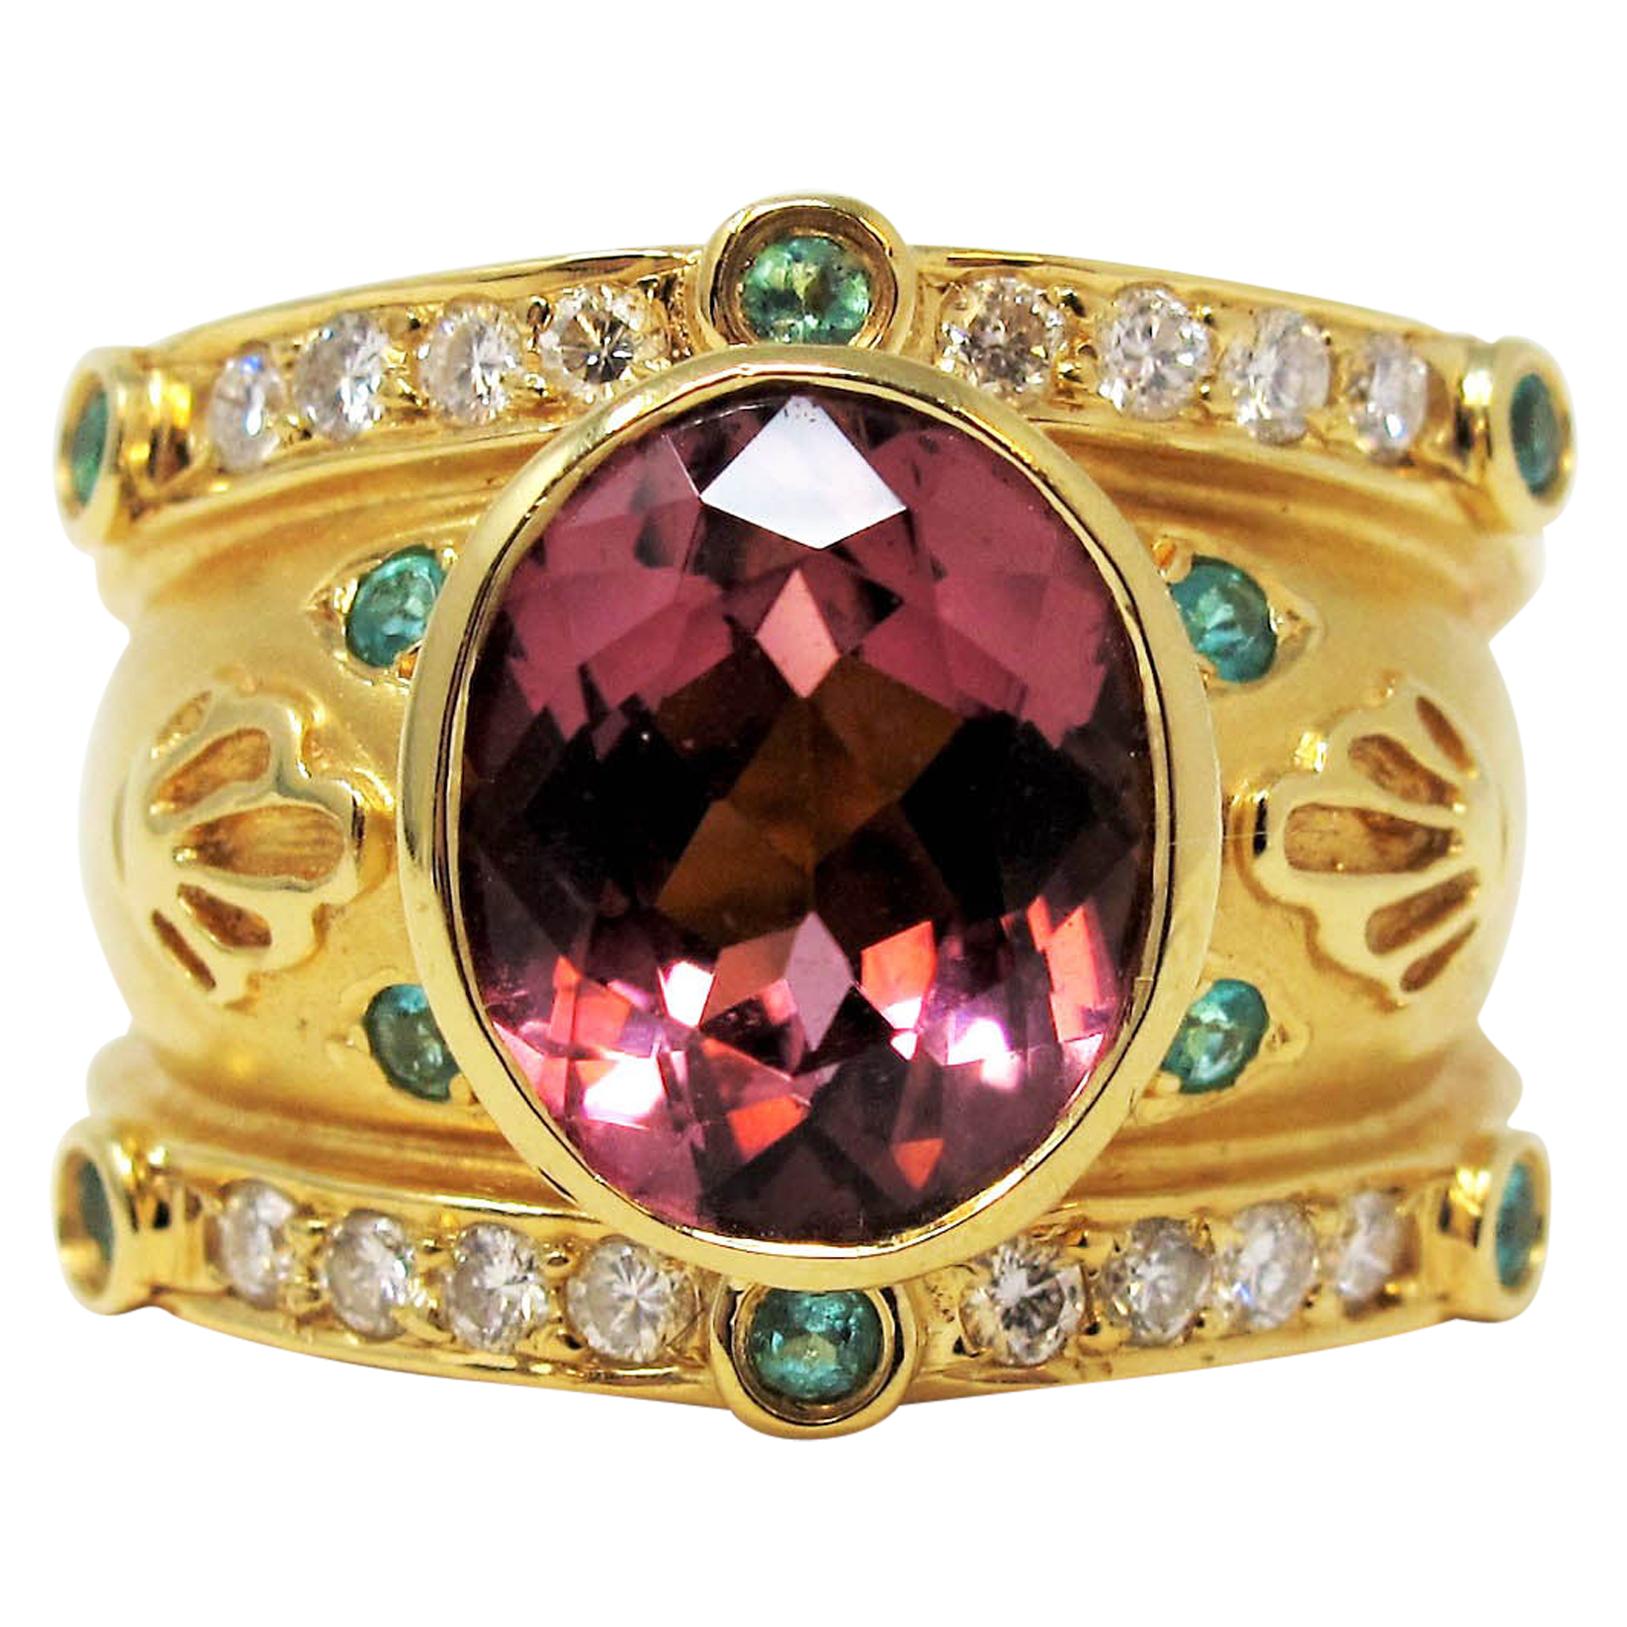 Judy Mayfield Etruscan Style 18K Gold Cigar Band Ring Pink and Green Tourmaline 